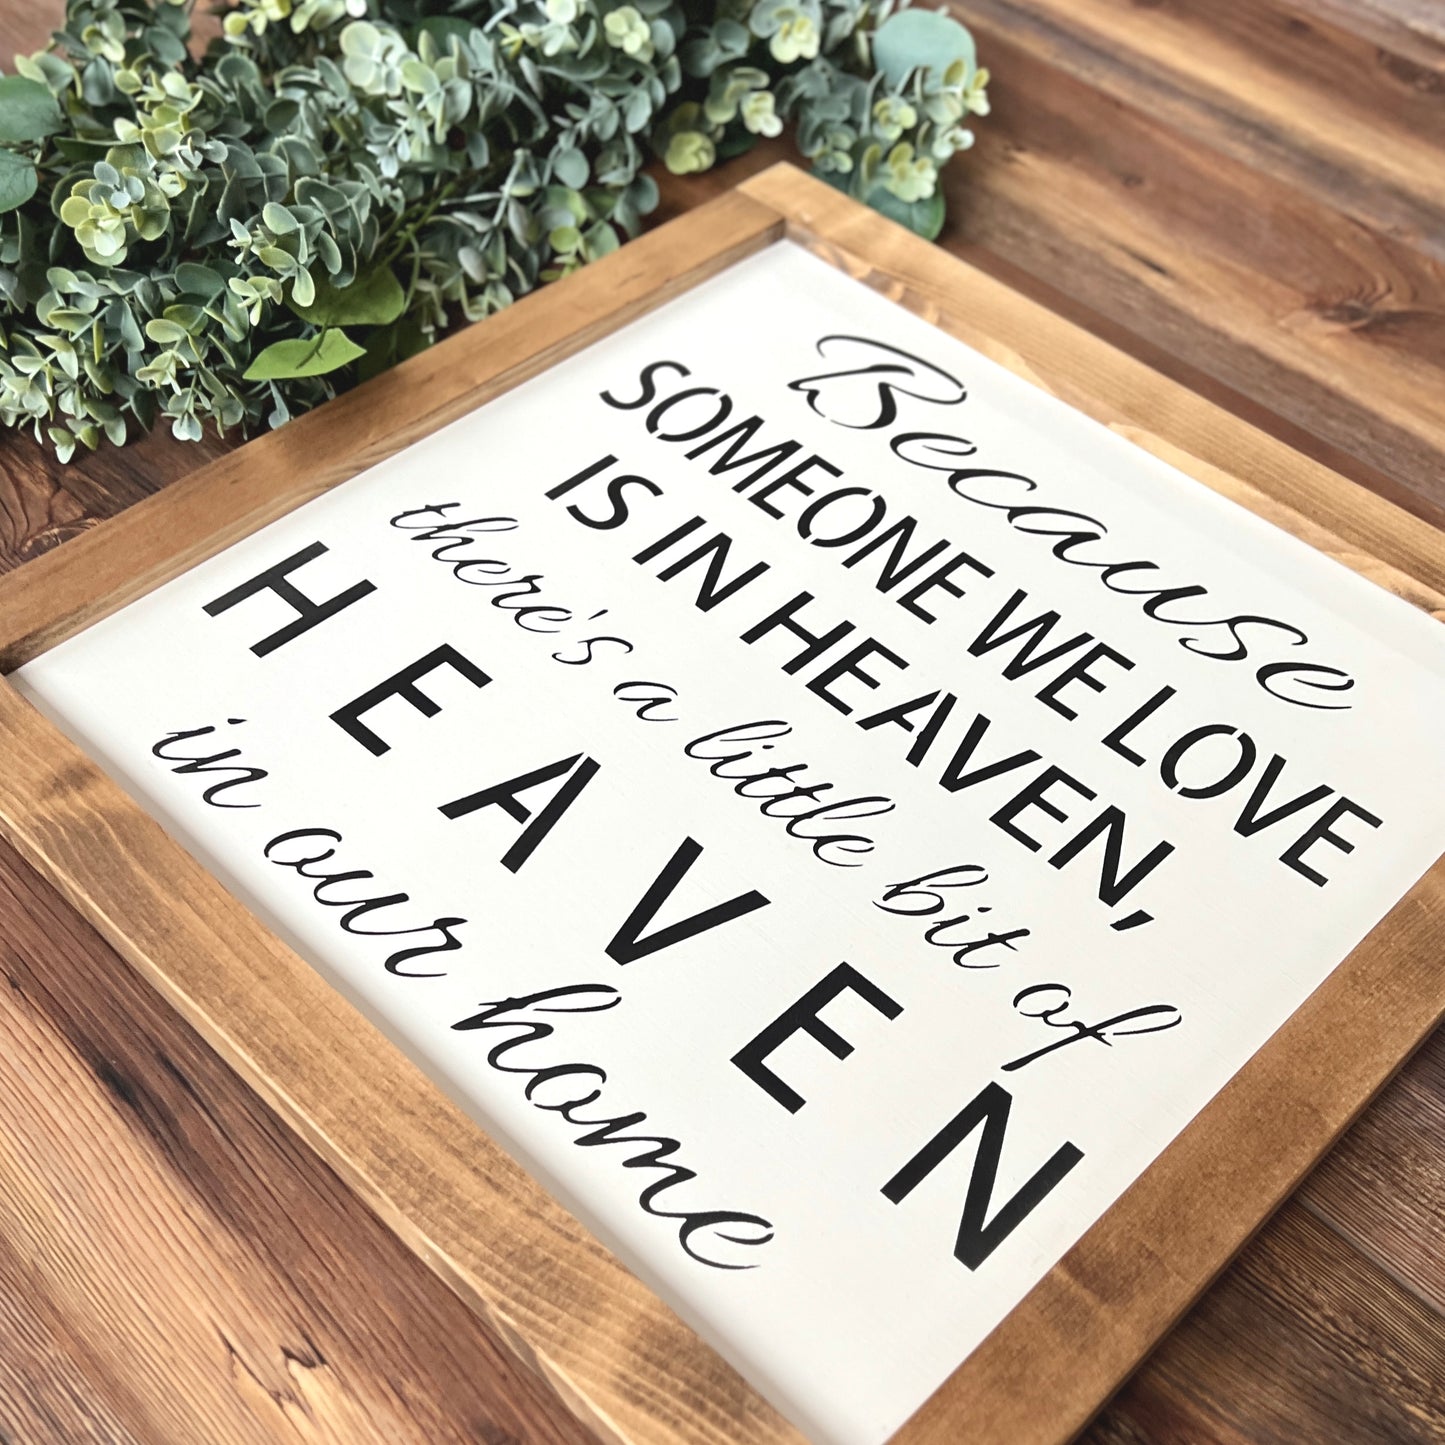 Because someone we love is in heaven wood sign with frame - Condolences gift